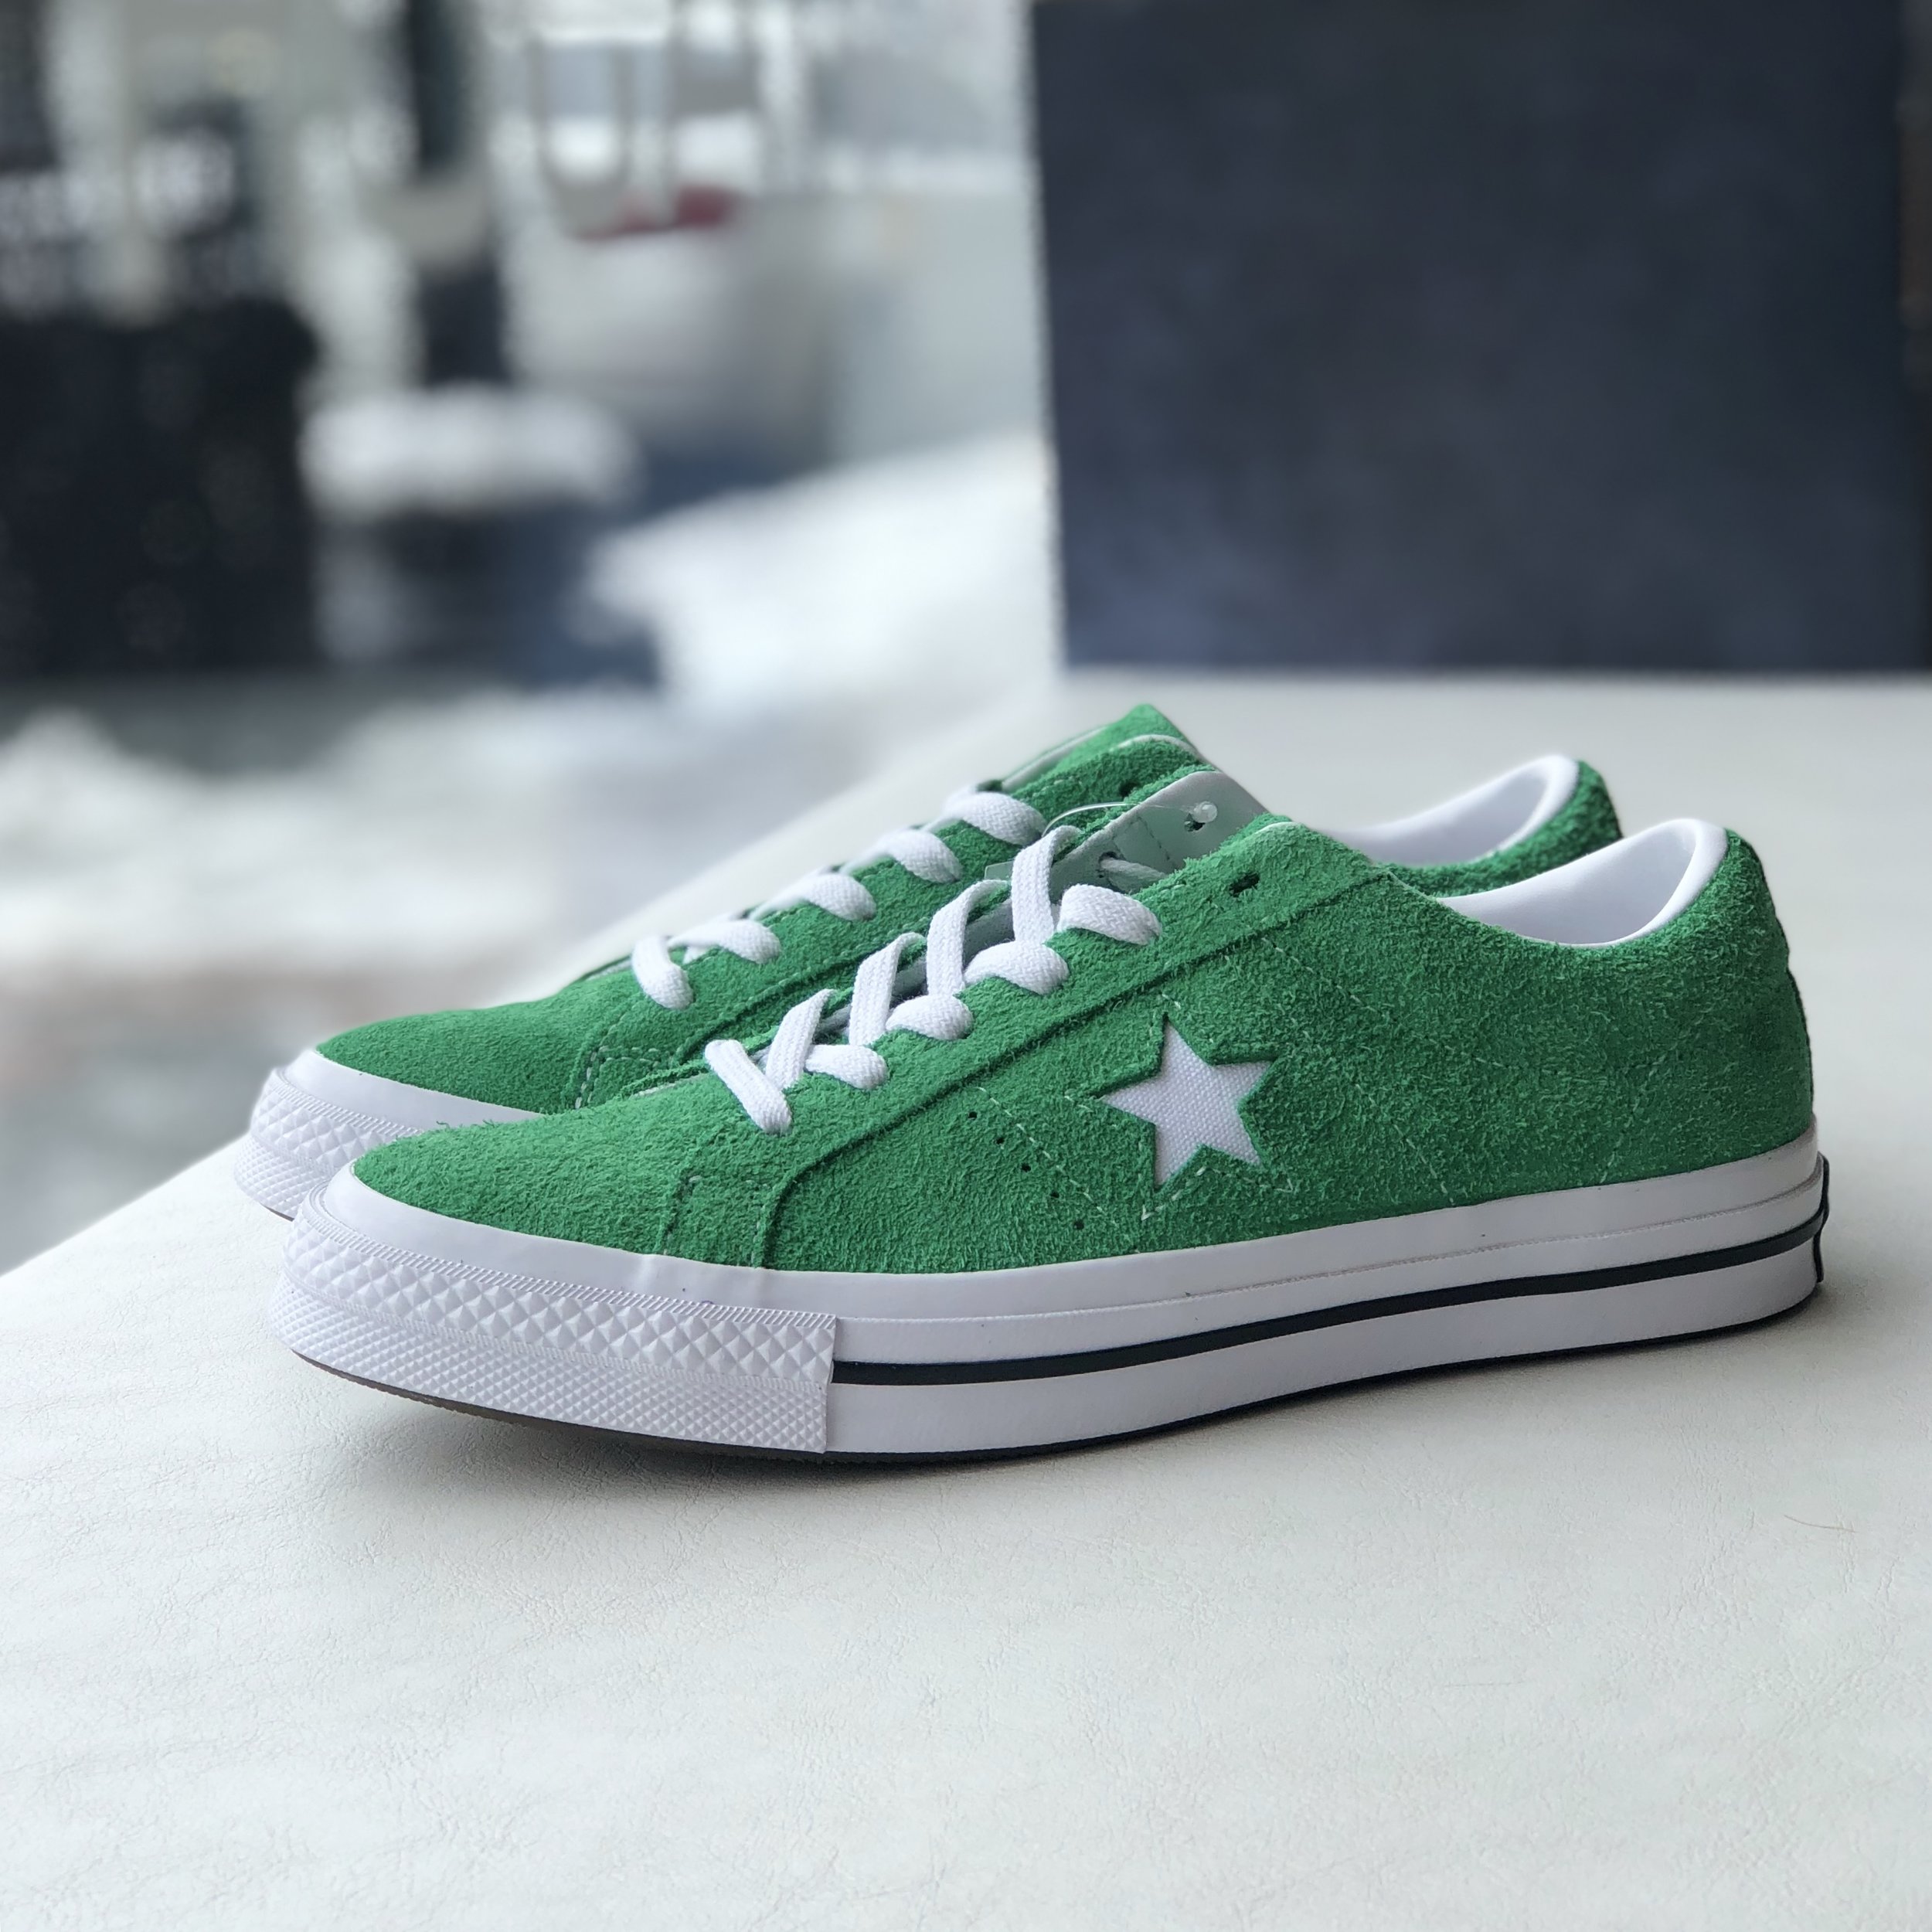 Converse One Star Premium Suede Low in 